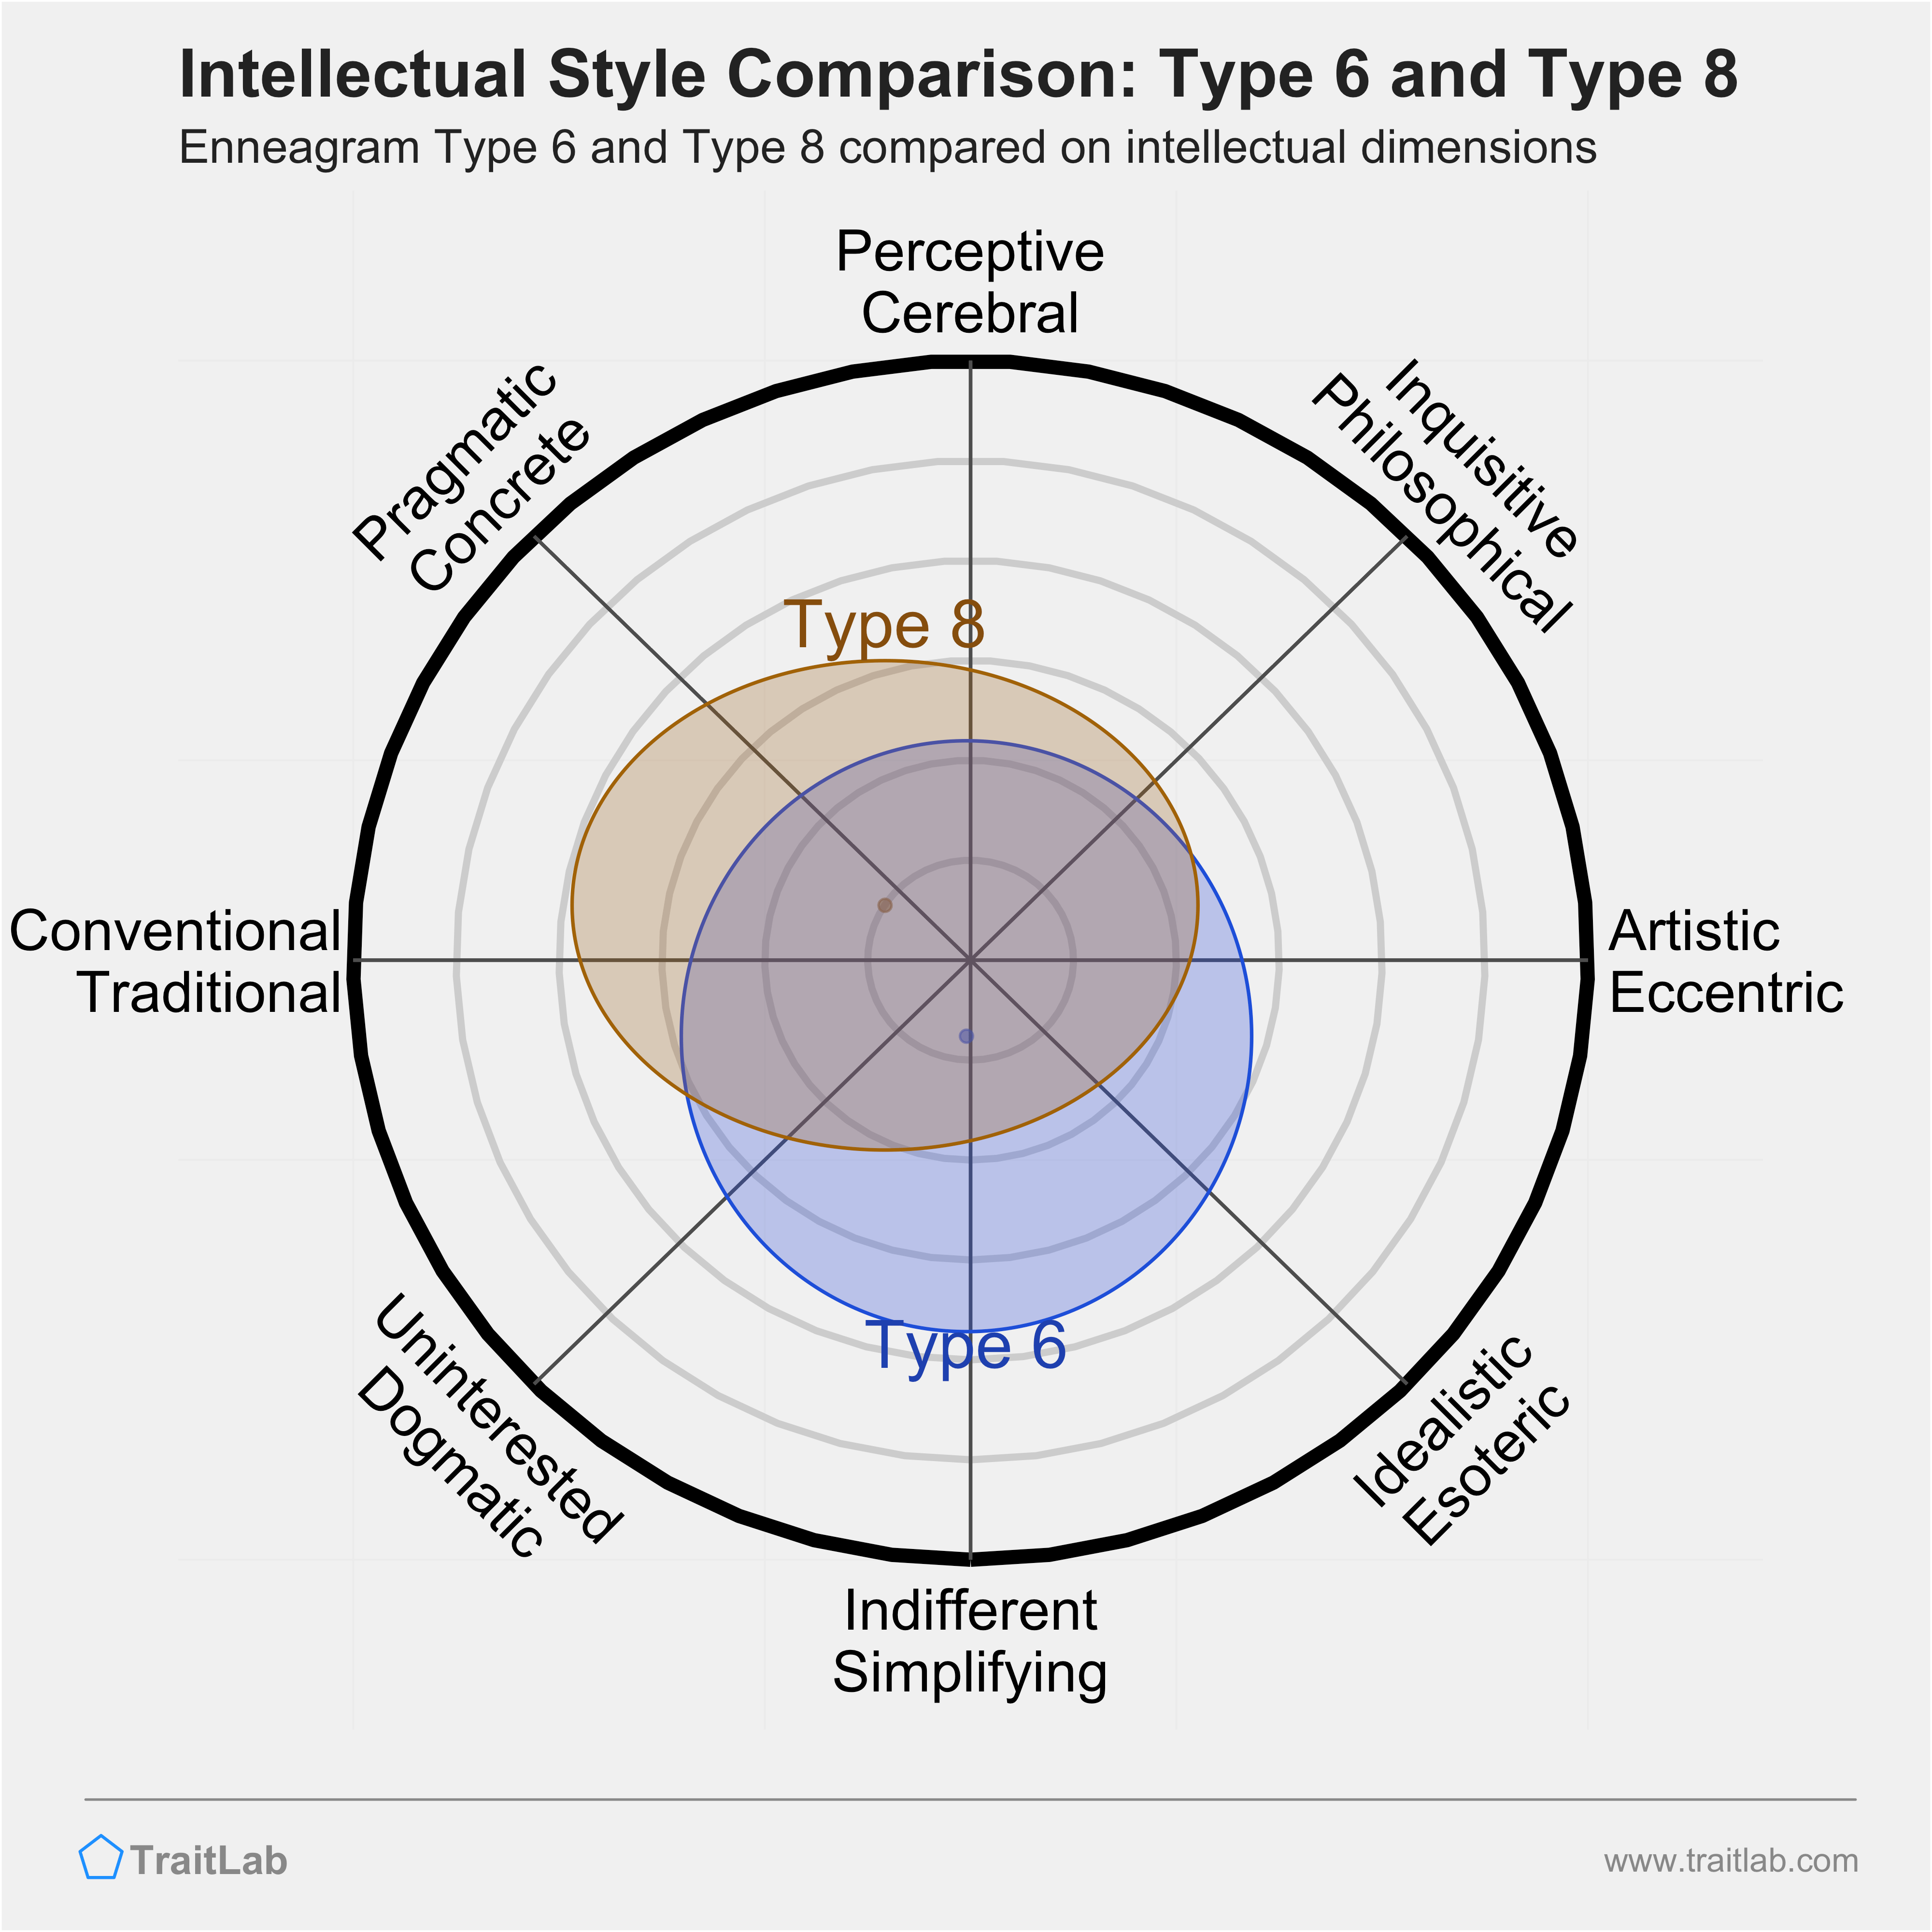 Type 6 and Type 8 comparison across intellectual dimensions